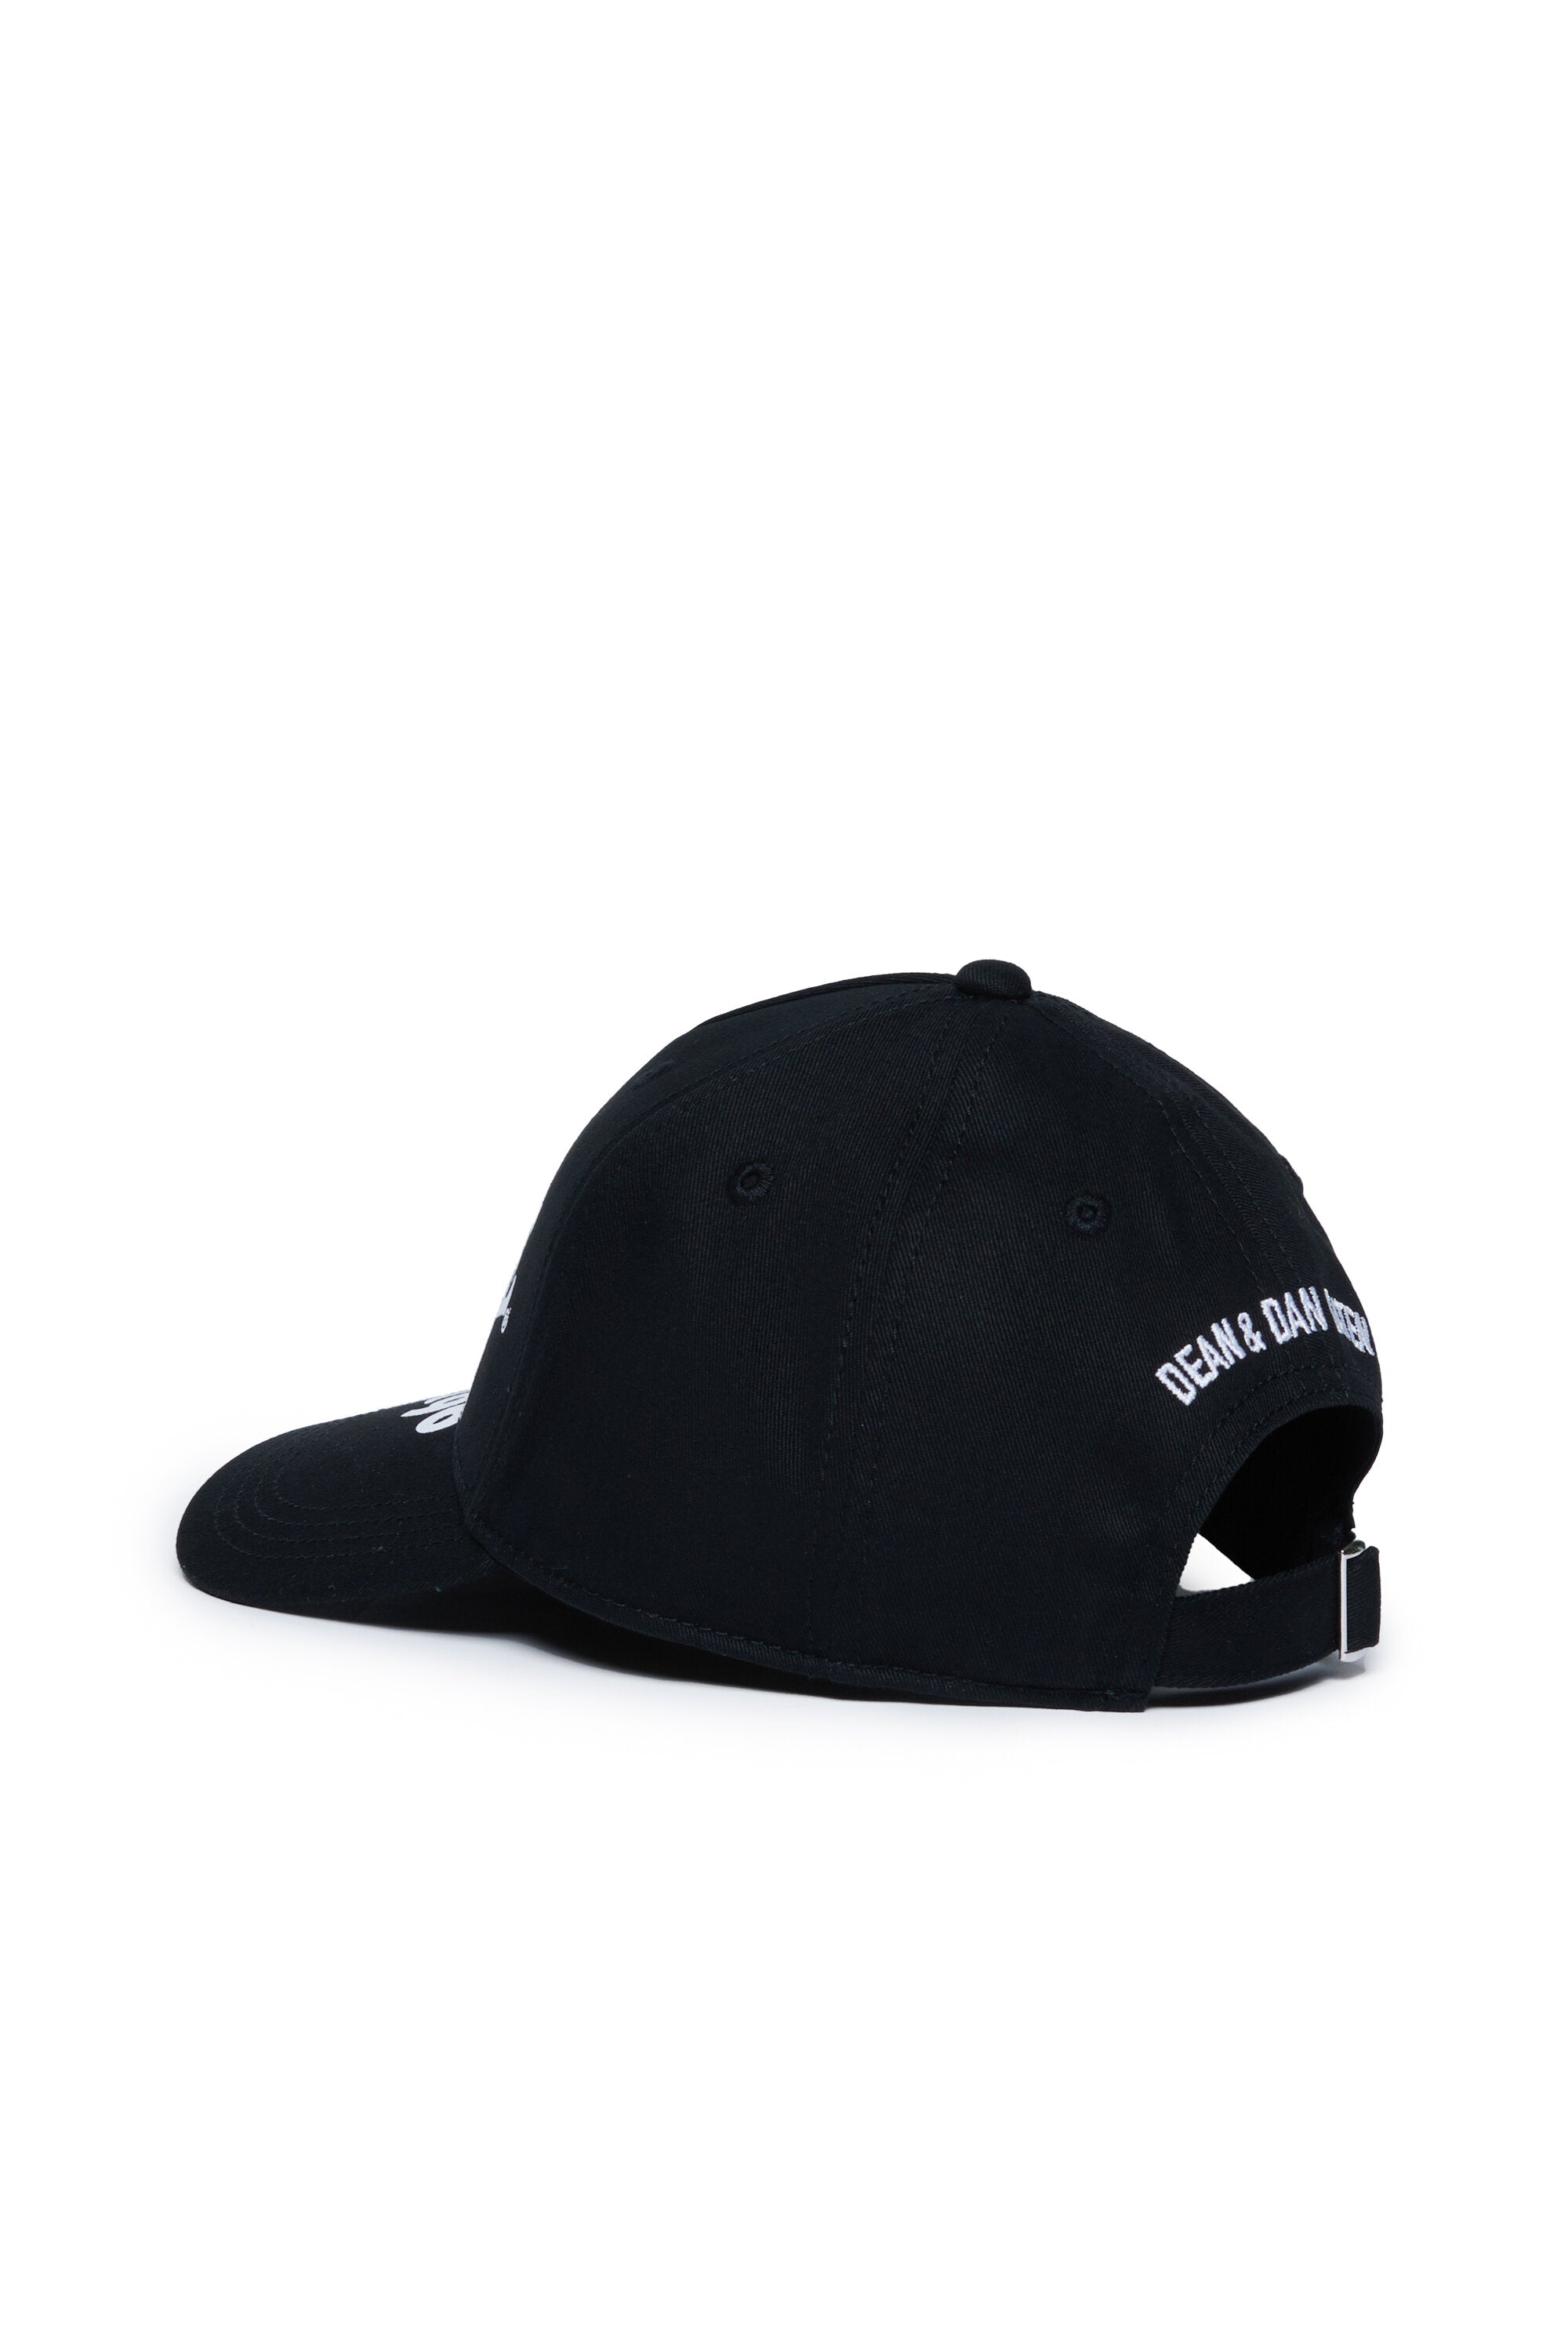 Baseball cap with 1964 Wave graphic